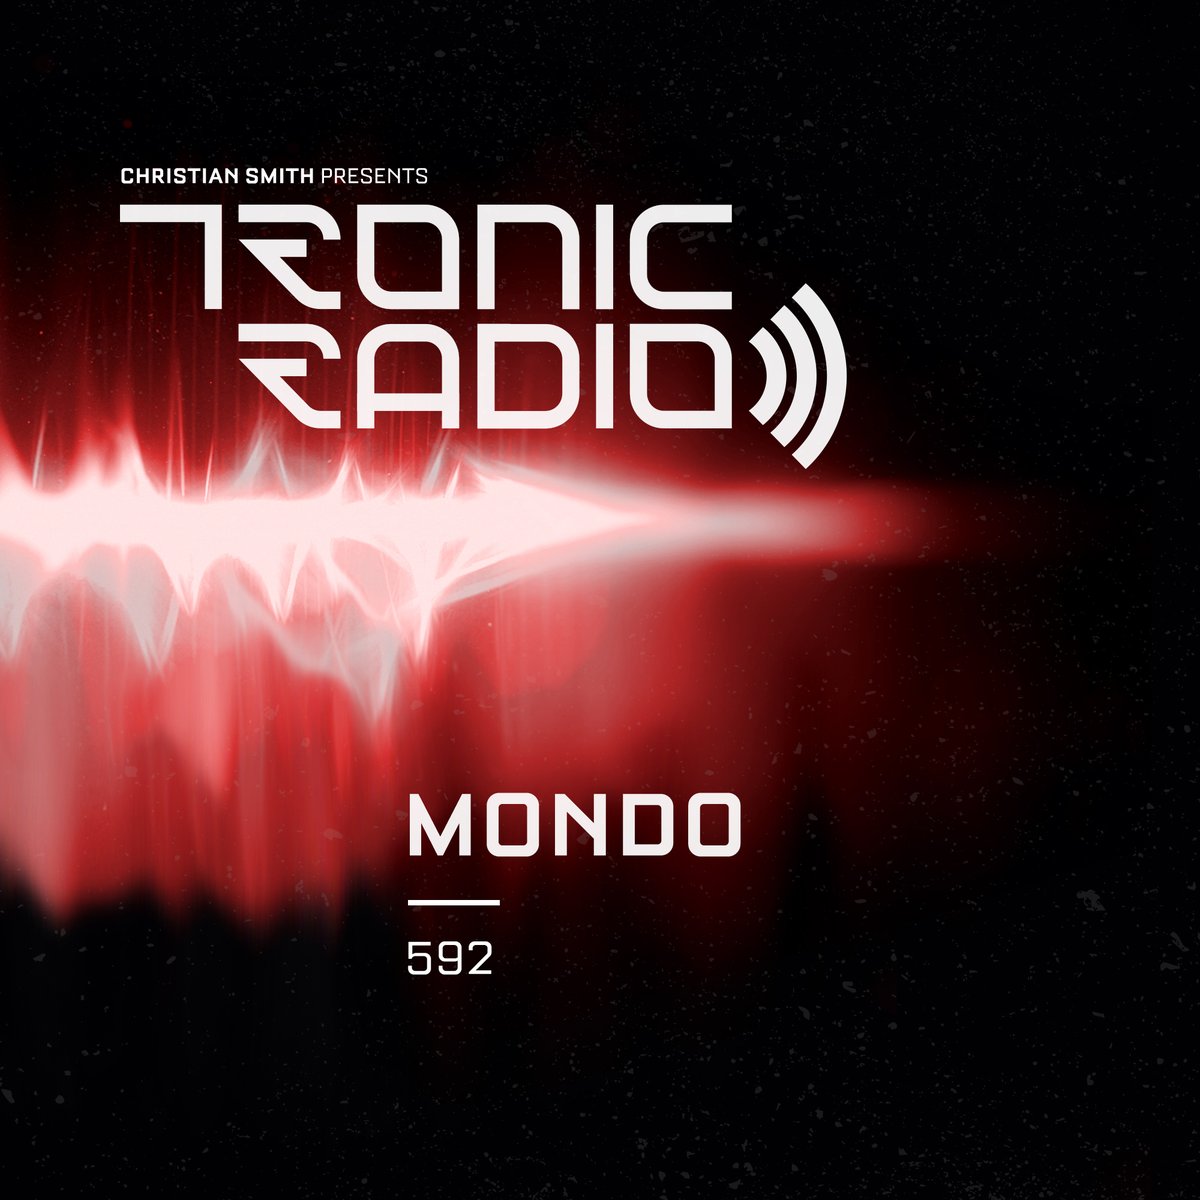 Now Playing: Tronic Podcast 592 with Mondo soundcloud.com/christiansmith…